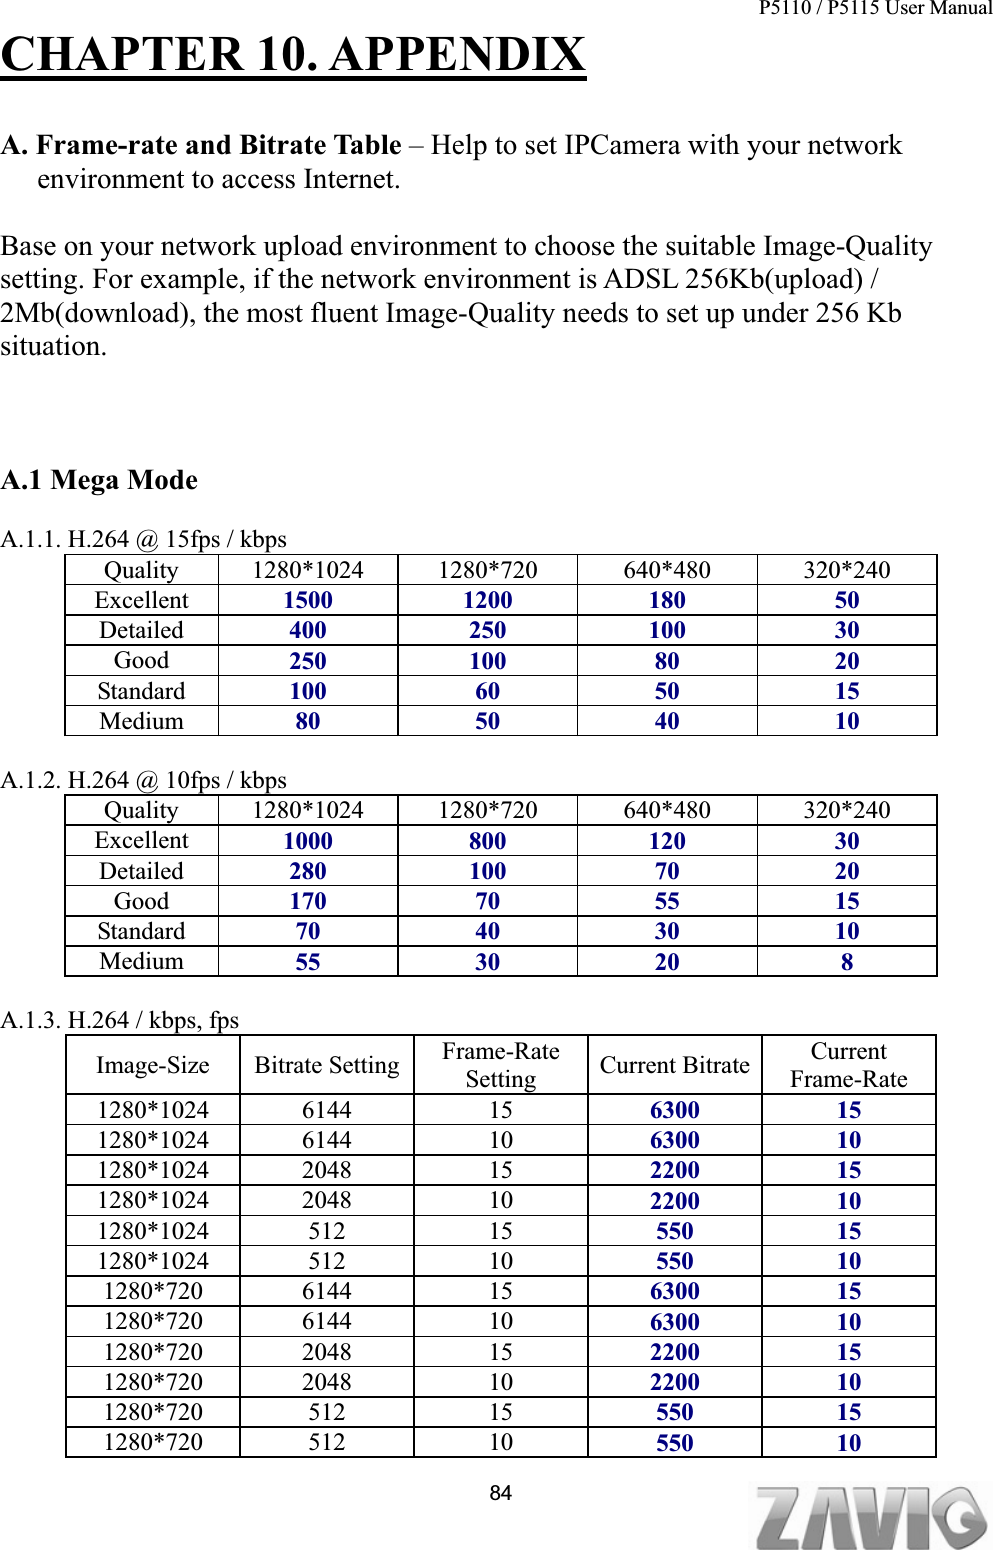 P5110 / P5115 User Manual                                                                           84CHAPTER 10. APPENDIXA. Frame-rate and Bitrate Table – Help to set IPCamera with your network environment to access Internet. Base on your network upload environment to choose the suitable Image-Quality setting. For example, if the network environment is ADSL 256Kb(upload) / 2Mb(download), the most fluent Image-Quality needs to set up under 256 Kb situation.A.1 Mega Mode A.1.1. H.264 @ 15fps / kbps Quality 1280*1024 1280*720  640*480  320*240 Excellent  1500 1200  180  50 Detailed 400 250 100  30 Good 250 100  80  20 Standard  100 60  50  15 Medium  80 50 40 10 A.1.2. H.264 @ 10fps / kbps Quality 1280*1024 1280*720  640*480  320*240 Excellent  1000 800  120  30 Detailed 280 100  70  20 Good 170 70  55  15 Standard  70 40 30 10 Medium  55 30 20  8 A.1.3. H.264 / kbps, fps Image-Size Bitrate Setting Frame-Rate Setting Current Bitrate CurrentFrame-Rate 1280*1024 6144  15  6300 15 1280*1024 6144  10  6300 10 1280*1024 2048  15  2200 15 1280*1024 2048  10  2200 10 1280*1024 512  15  550 15 1280*1024 512  10  550 10 1280*720 6144  15  6300 15 1280*720 6144  10  6300 10 1280*720 2048  15  2200 15 1280*720 2048  10  2200 10 1280*720 512  15  550 15 1280*720 512  10  550 10 